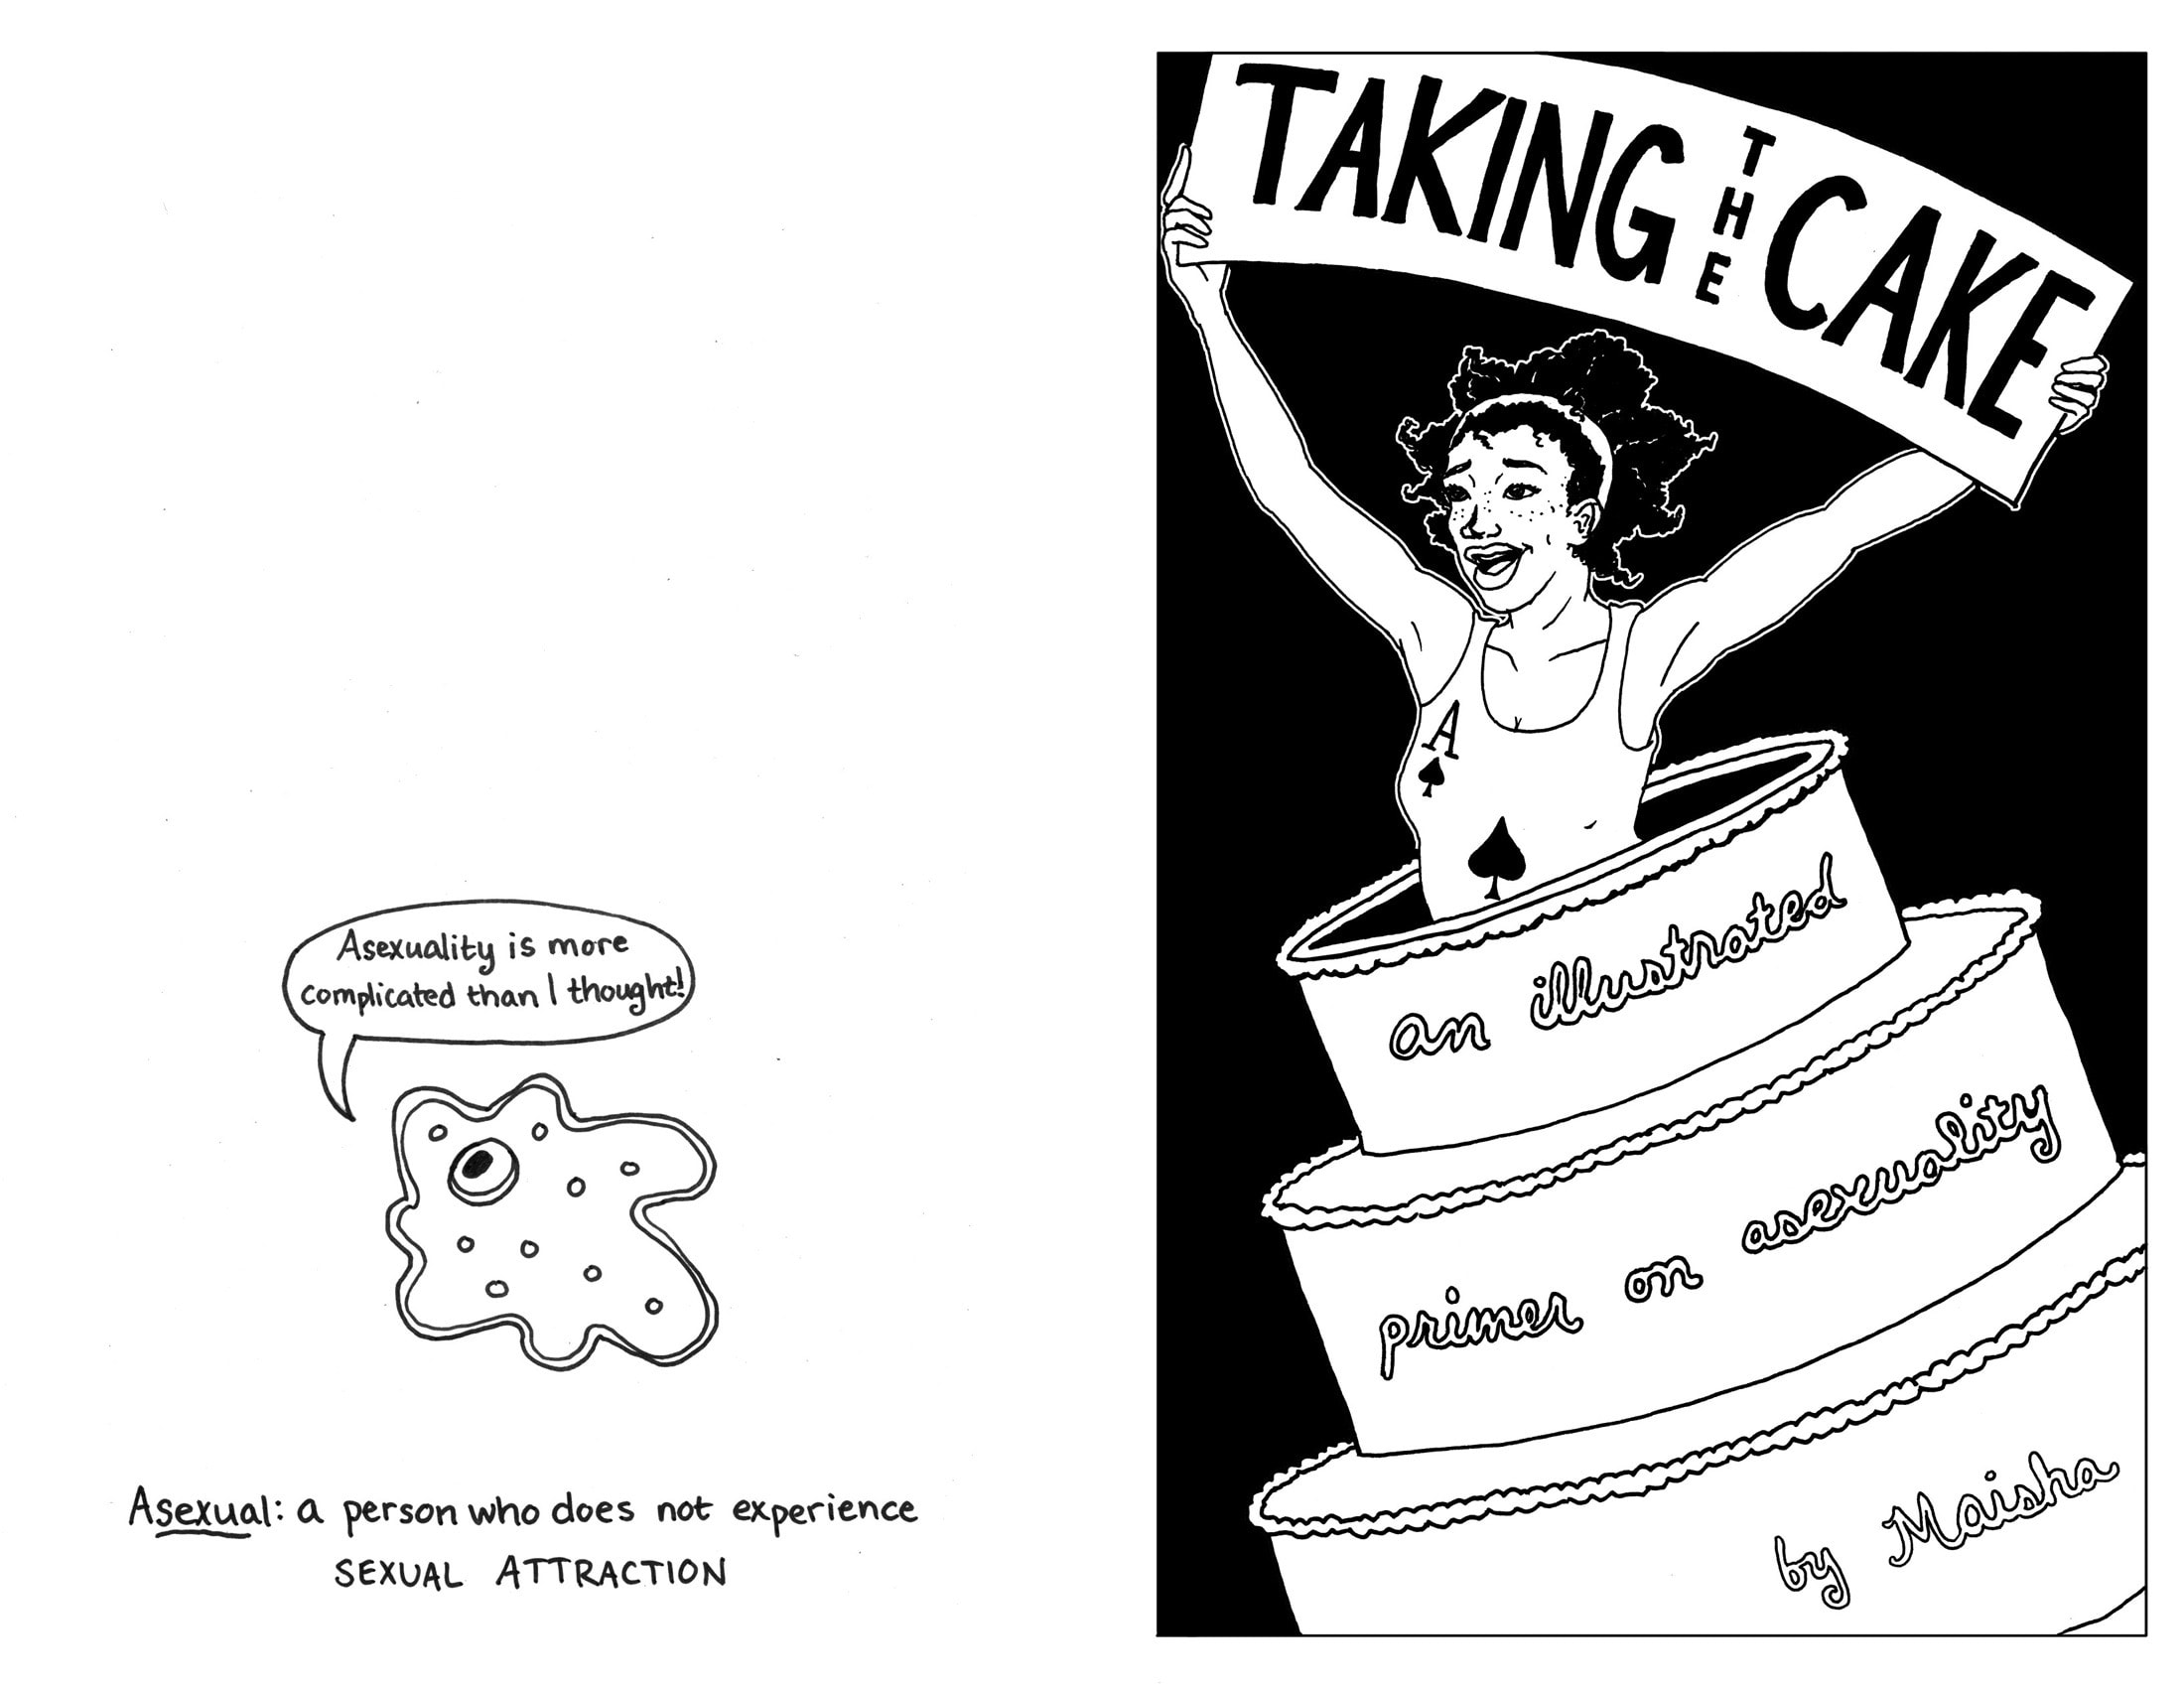 Cover of zine with a person wearing a shirt with an ace of spades pops out of a cake holding a sign reading “Taking the Cake.”